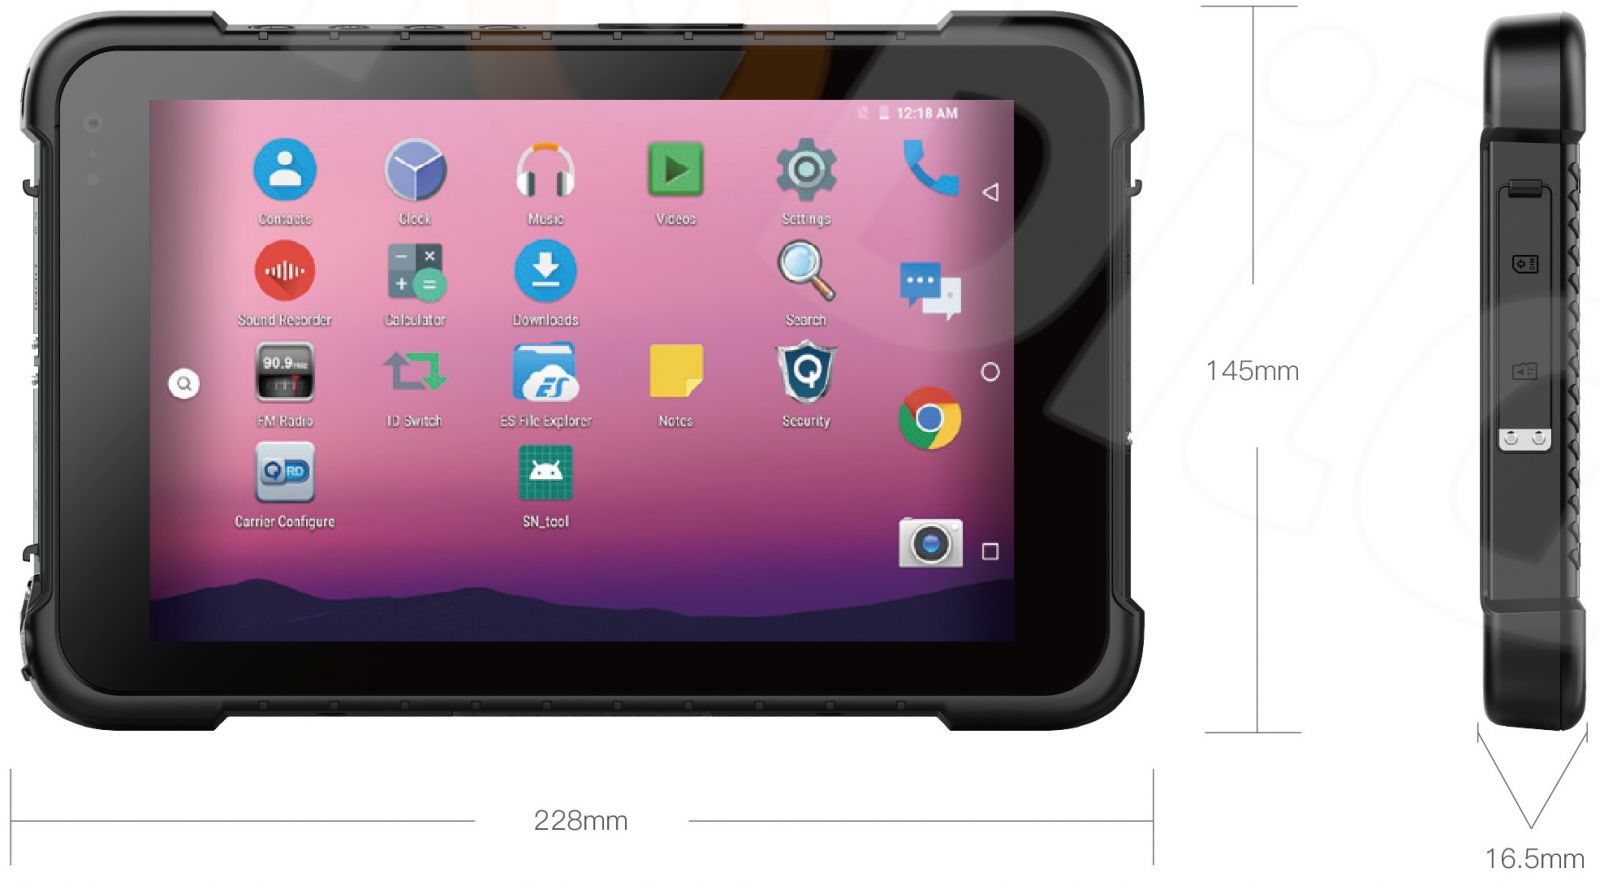 Industrial (IP67 + MIL-STD-810G) 8 inch tablet with 4GB RAM, 64GB ROM, Bluetooth and NFC - Emdoor Q86 v.1 